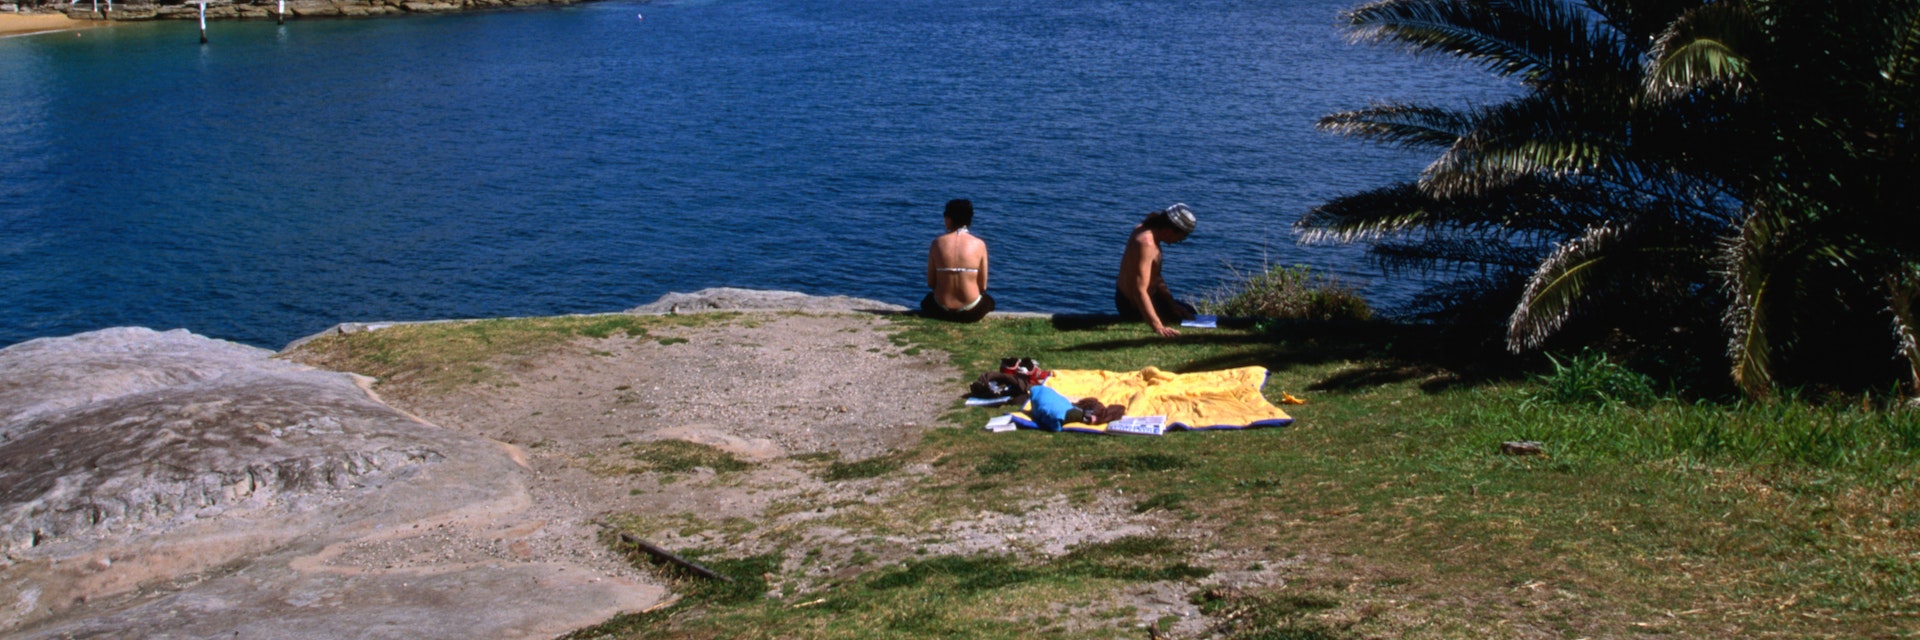 Sunbaking with a view on the bluff at Camp Cove.